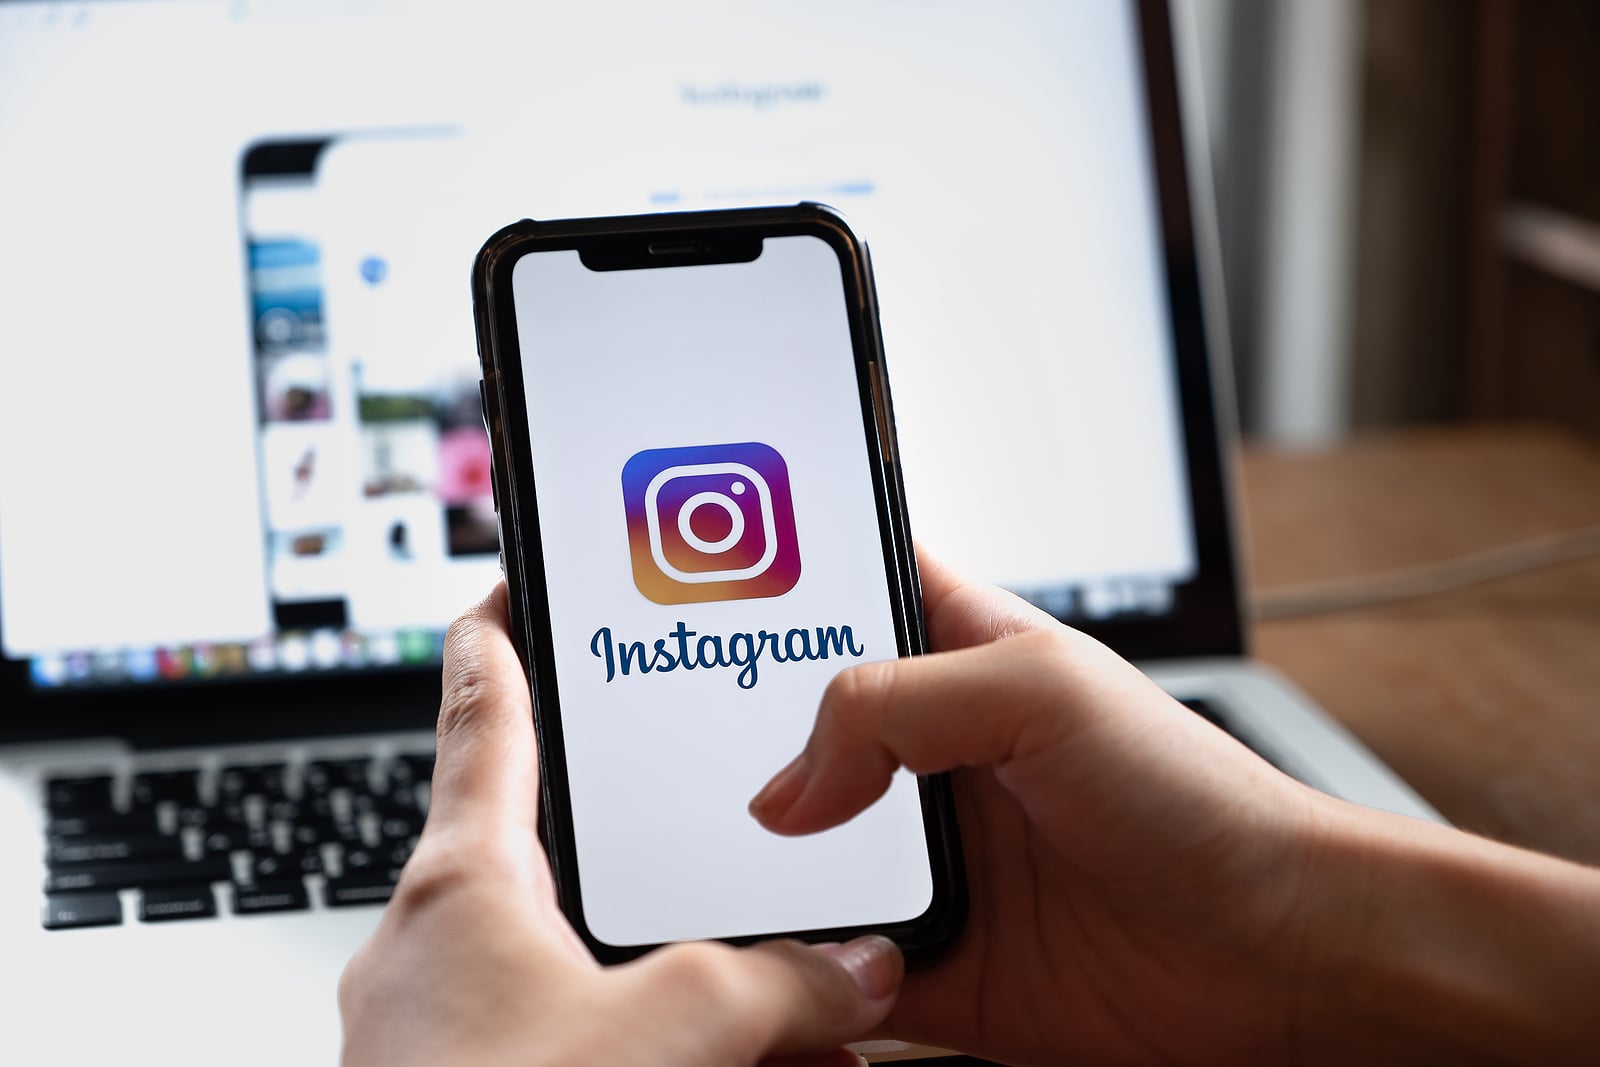 Instagram is one of the most popular social media platforms